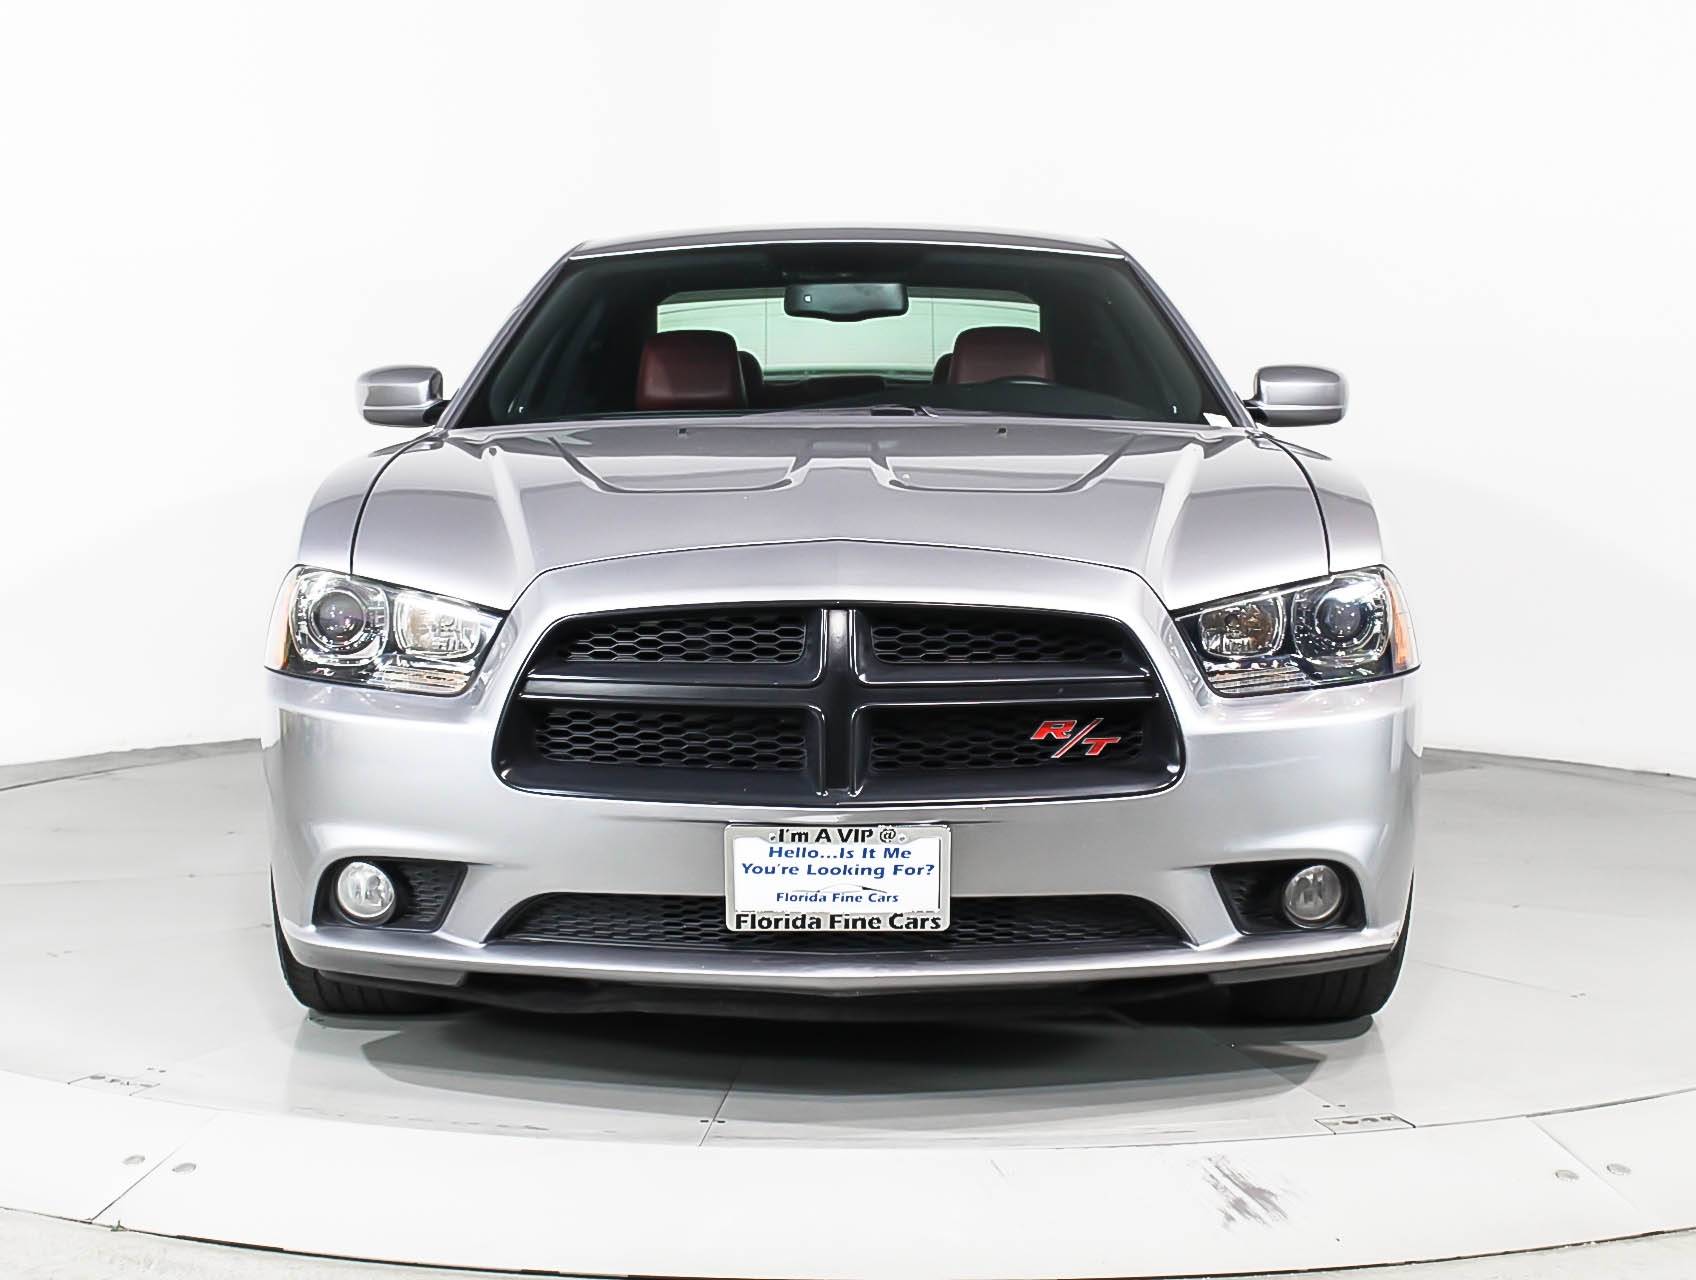 Florida Fine Cars - Used DODGE CHARGER 2014 MARGATE R/t